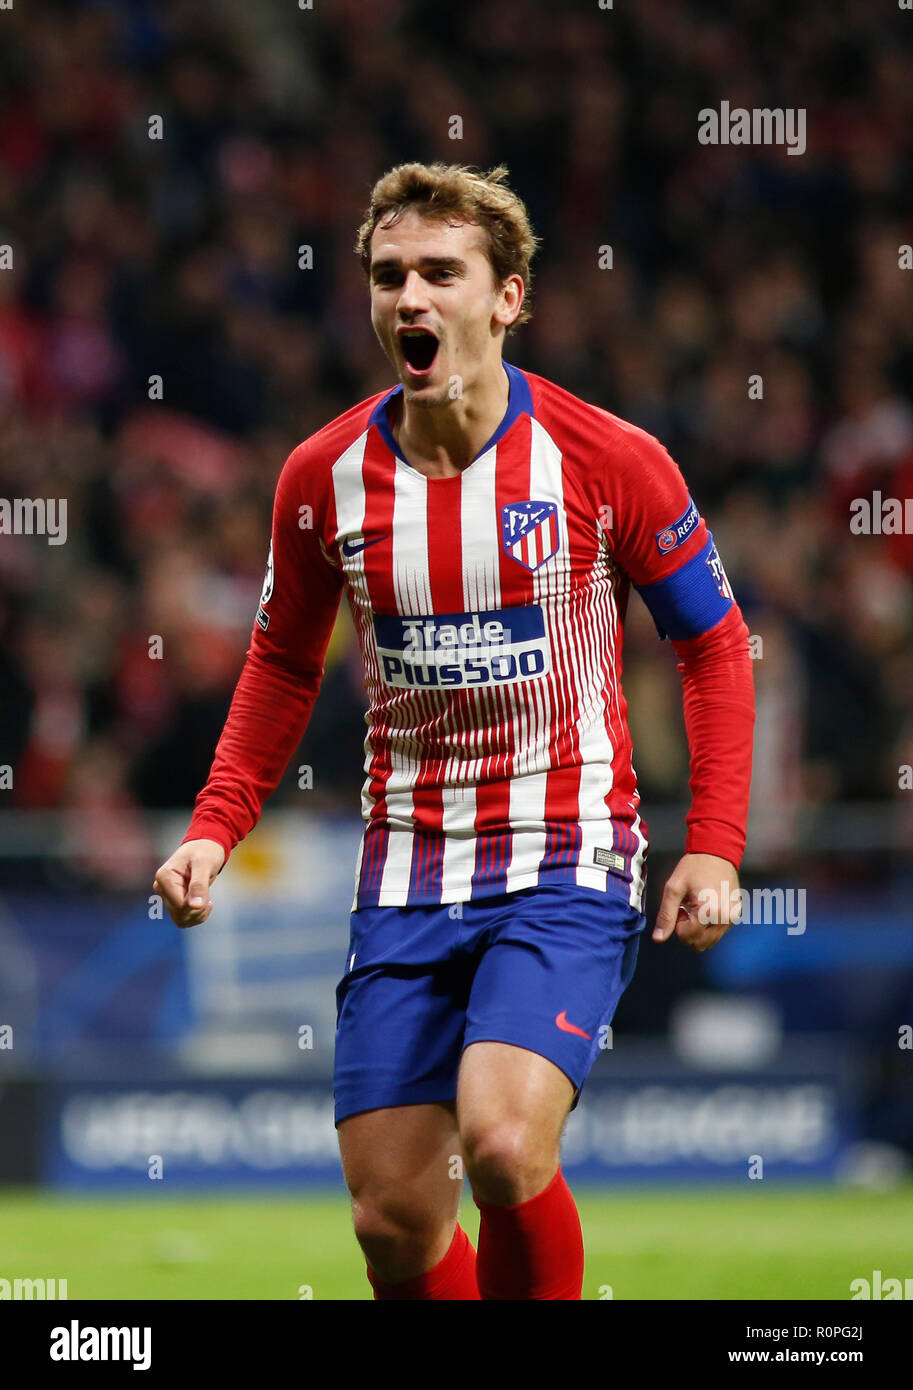 Madrid, Spain. 06th November 2018: Antoine Griezmann, forward from Atletico  de Madrid, celebrating after scoring during the UEFA Champions League group  stage against Borussia Dortmund at estadio Wanda Metropolitano. (Photo by:  Ivan